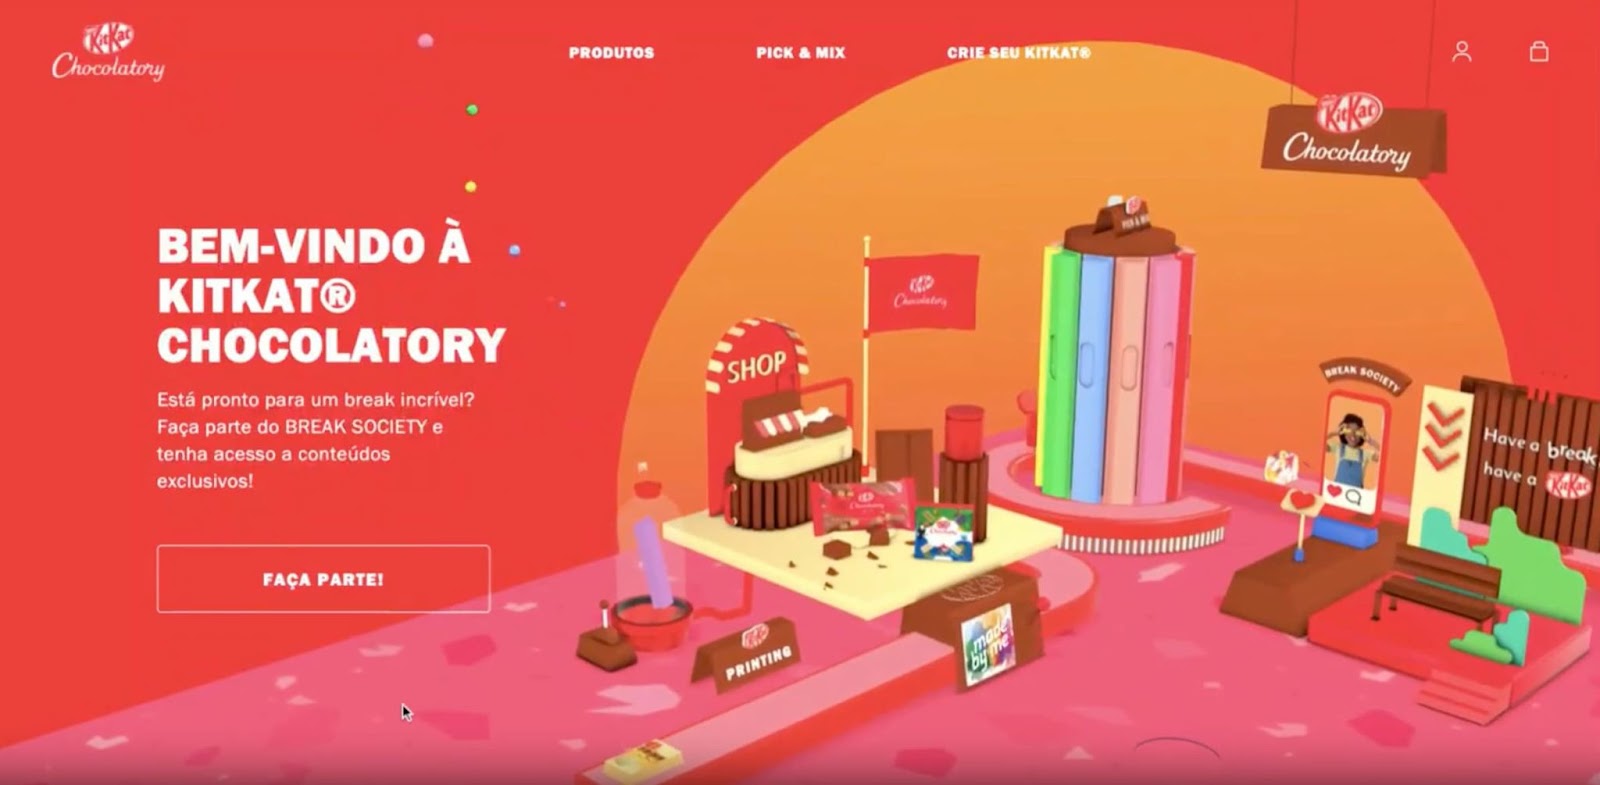 homepage for the 3d website kitkat chocolatory